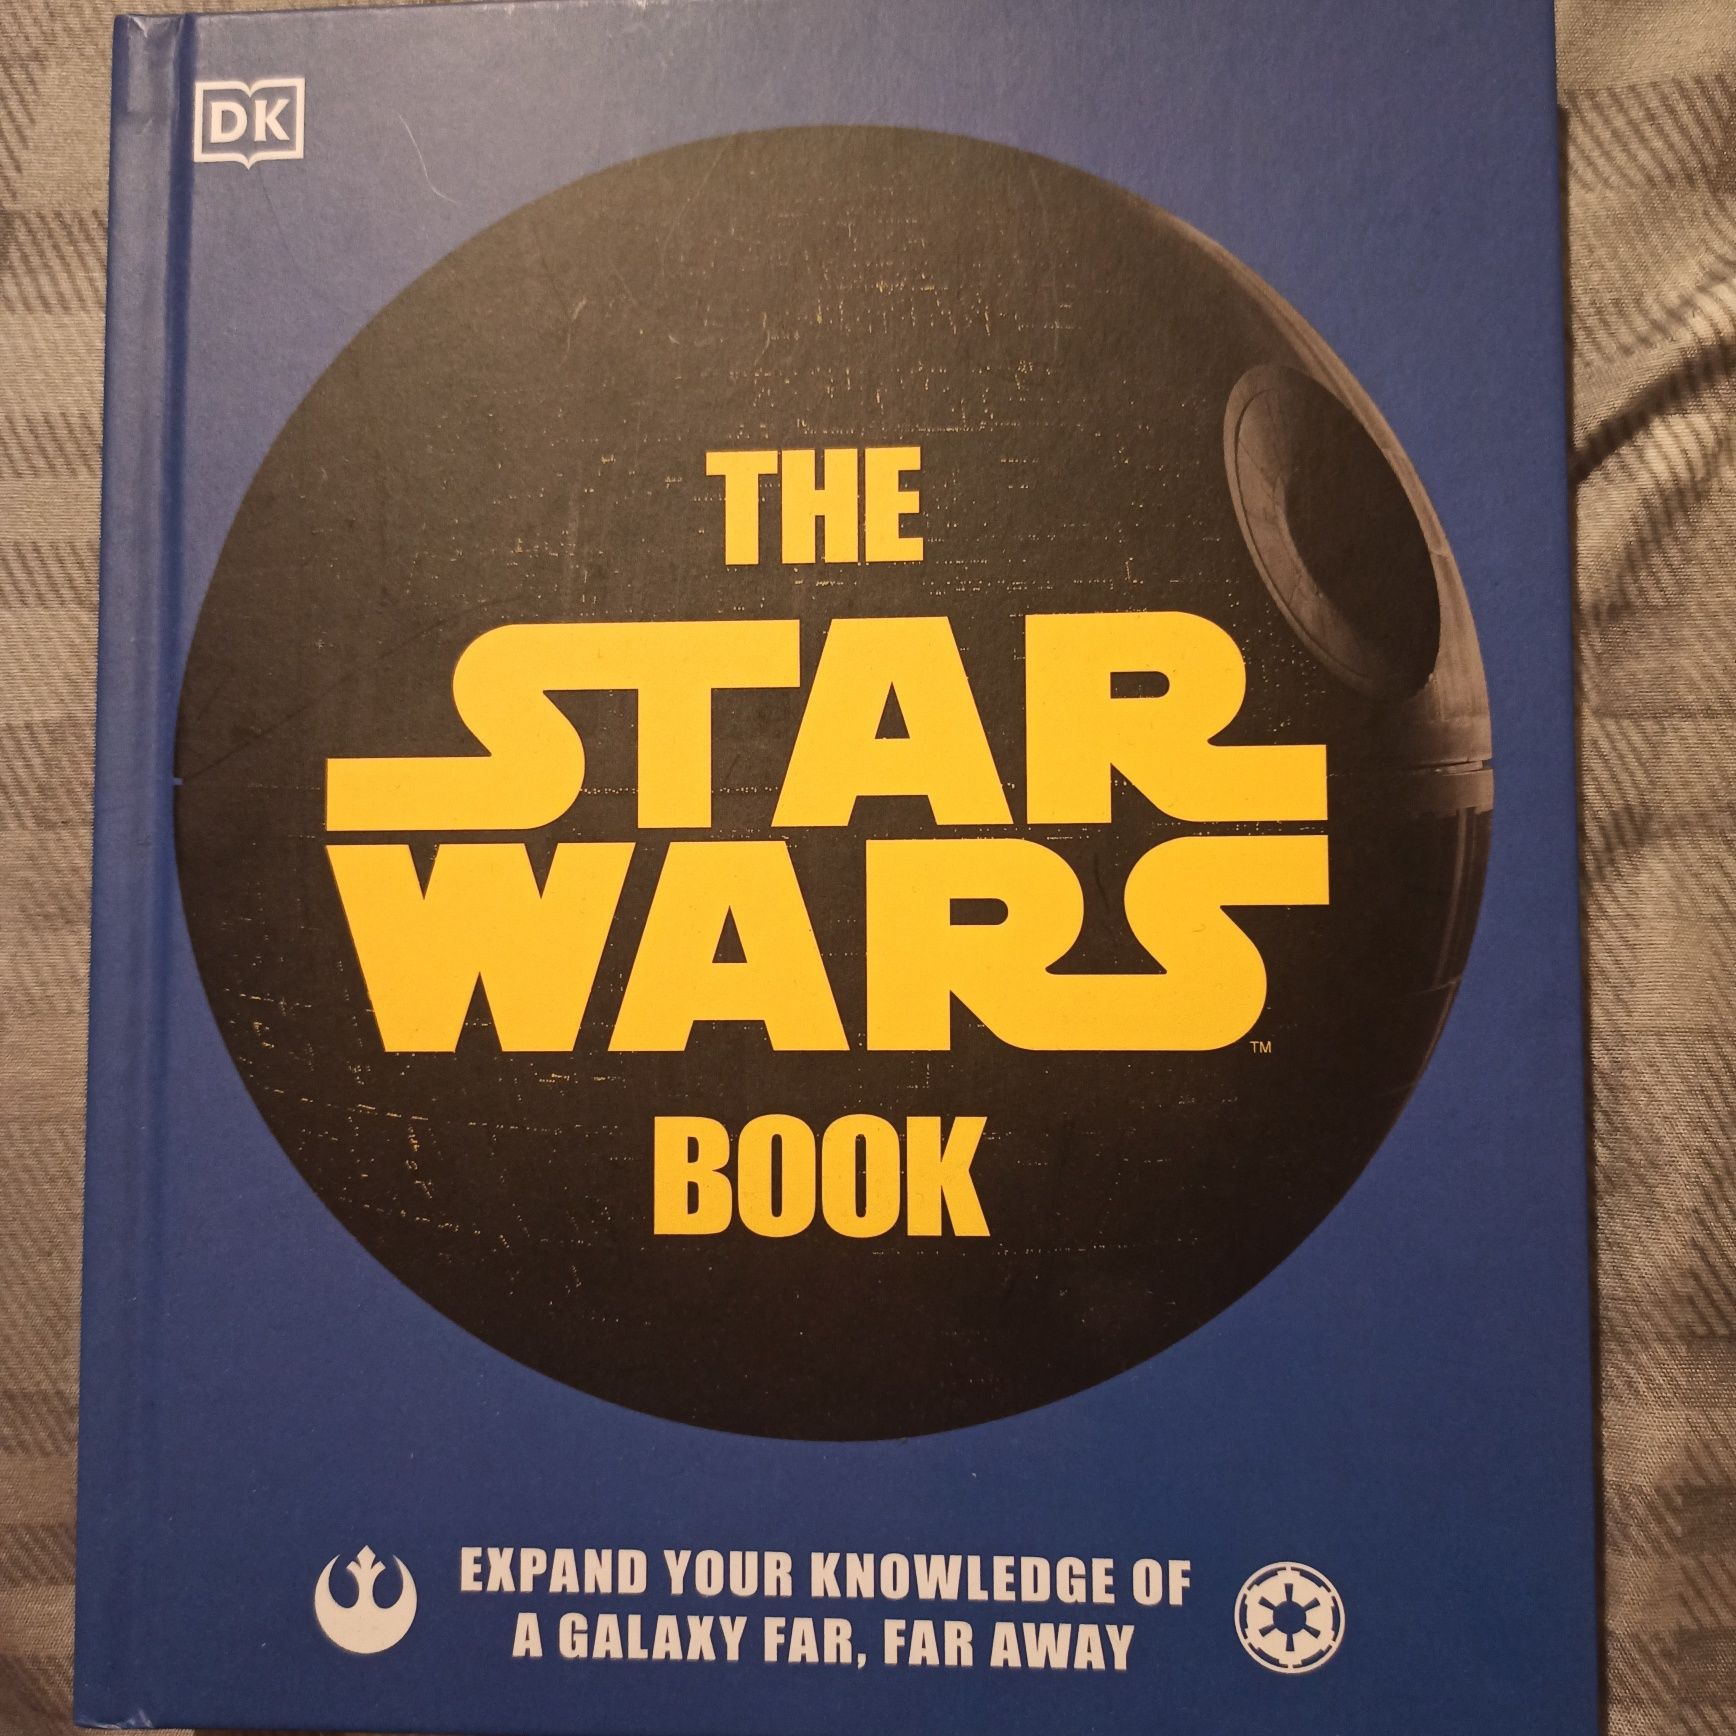 The star wars book